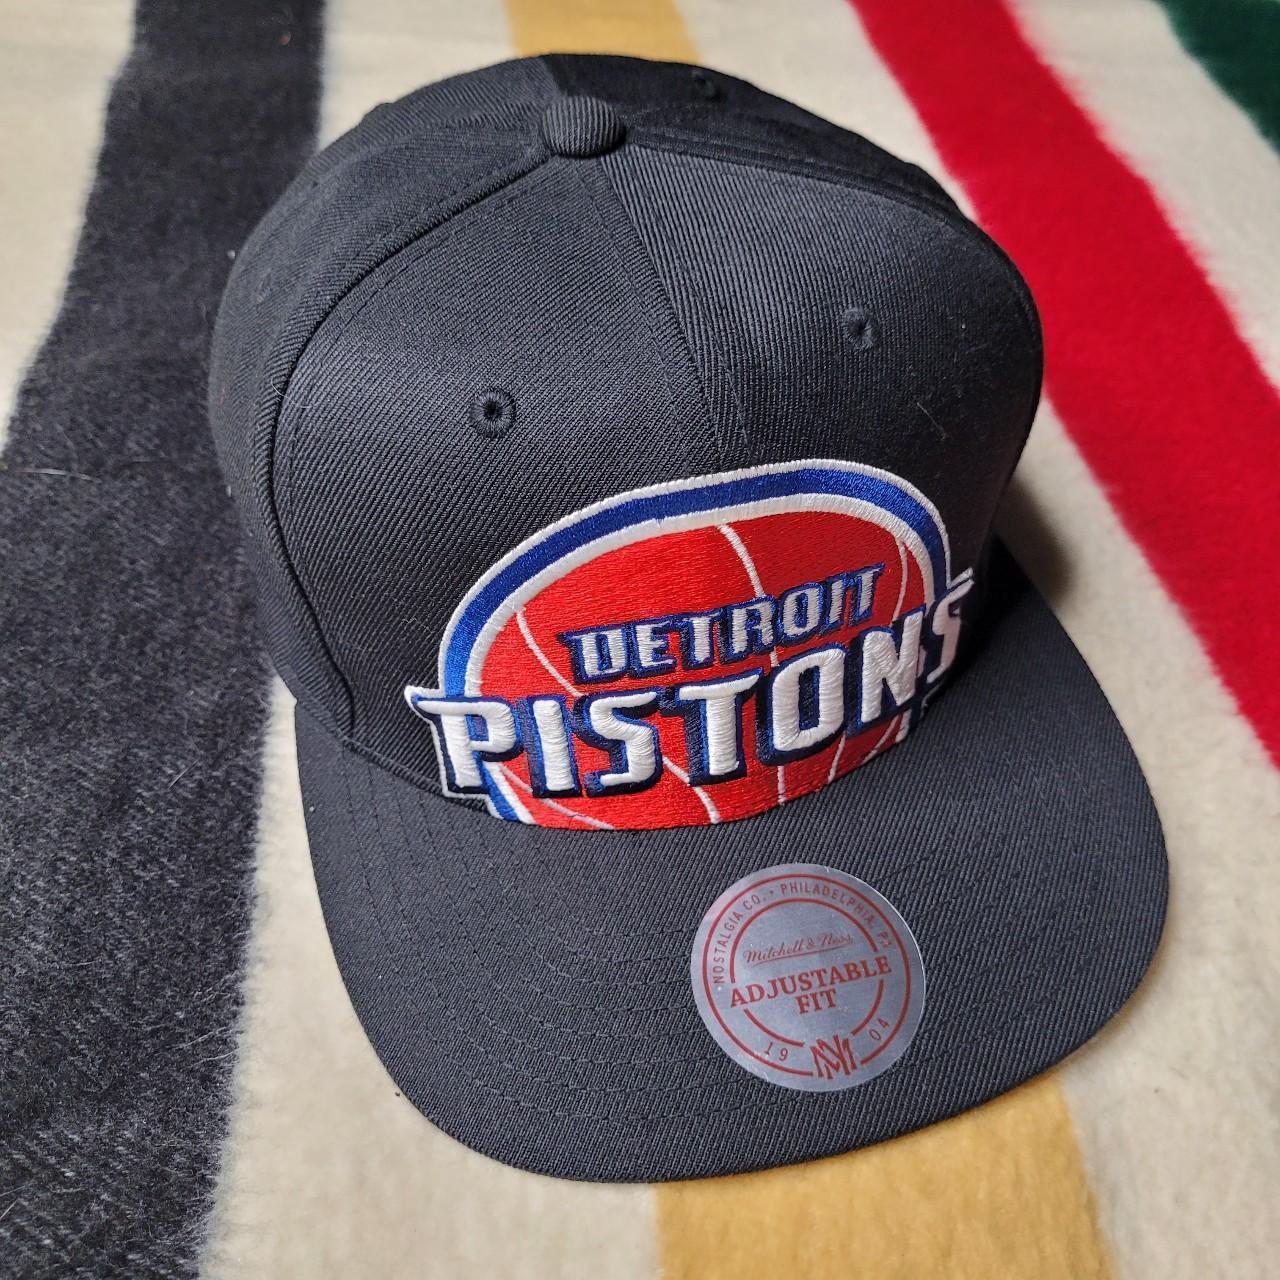 Mitchell and Ness Detroit Pistons - Depop